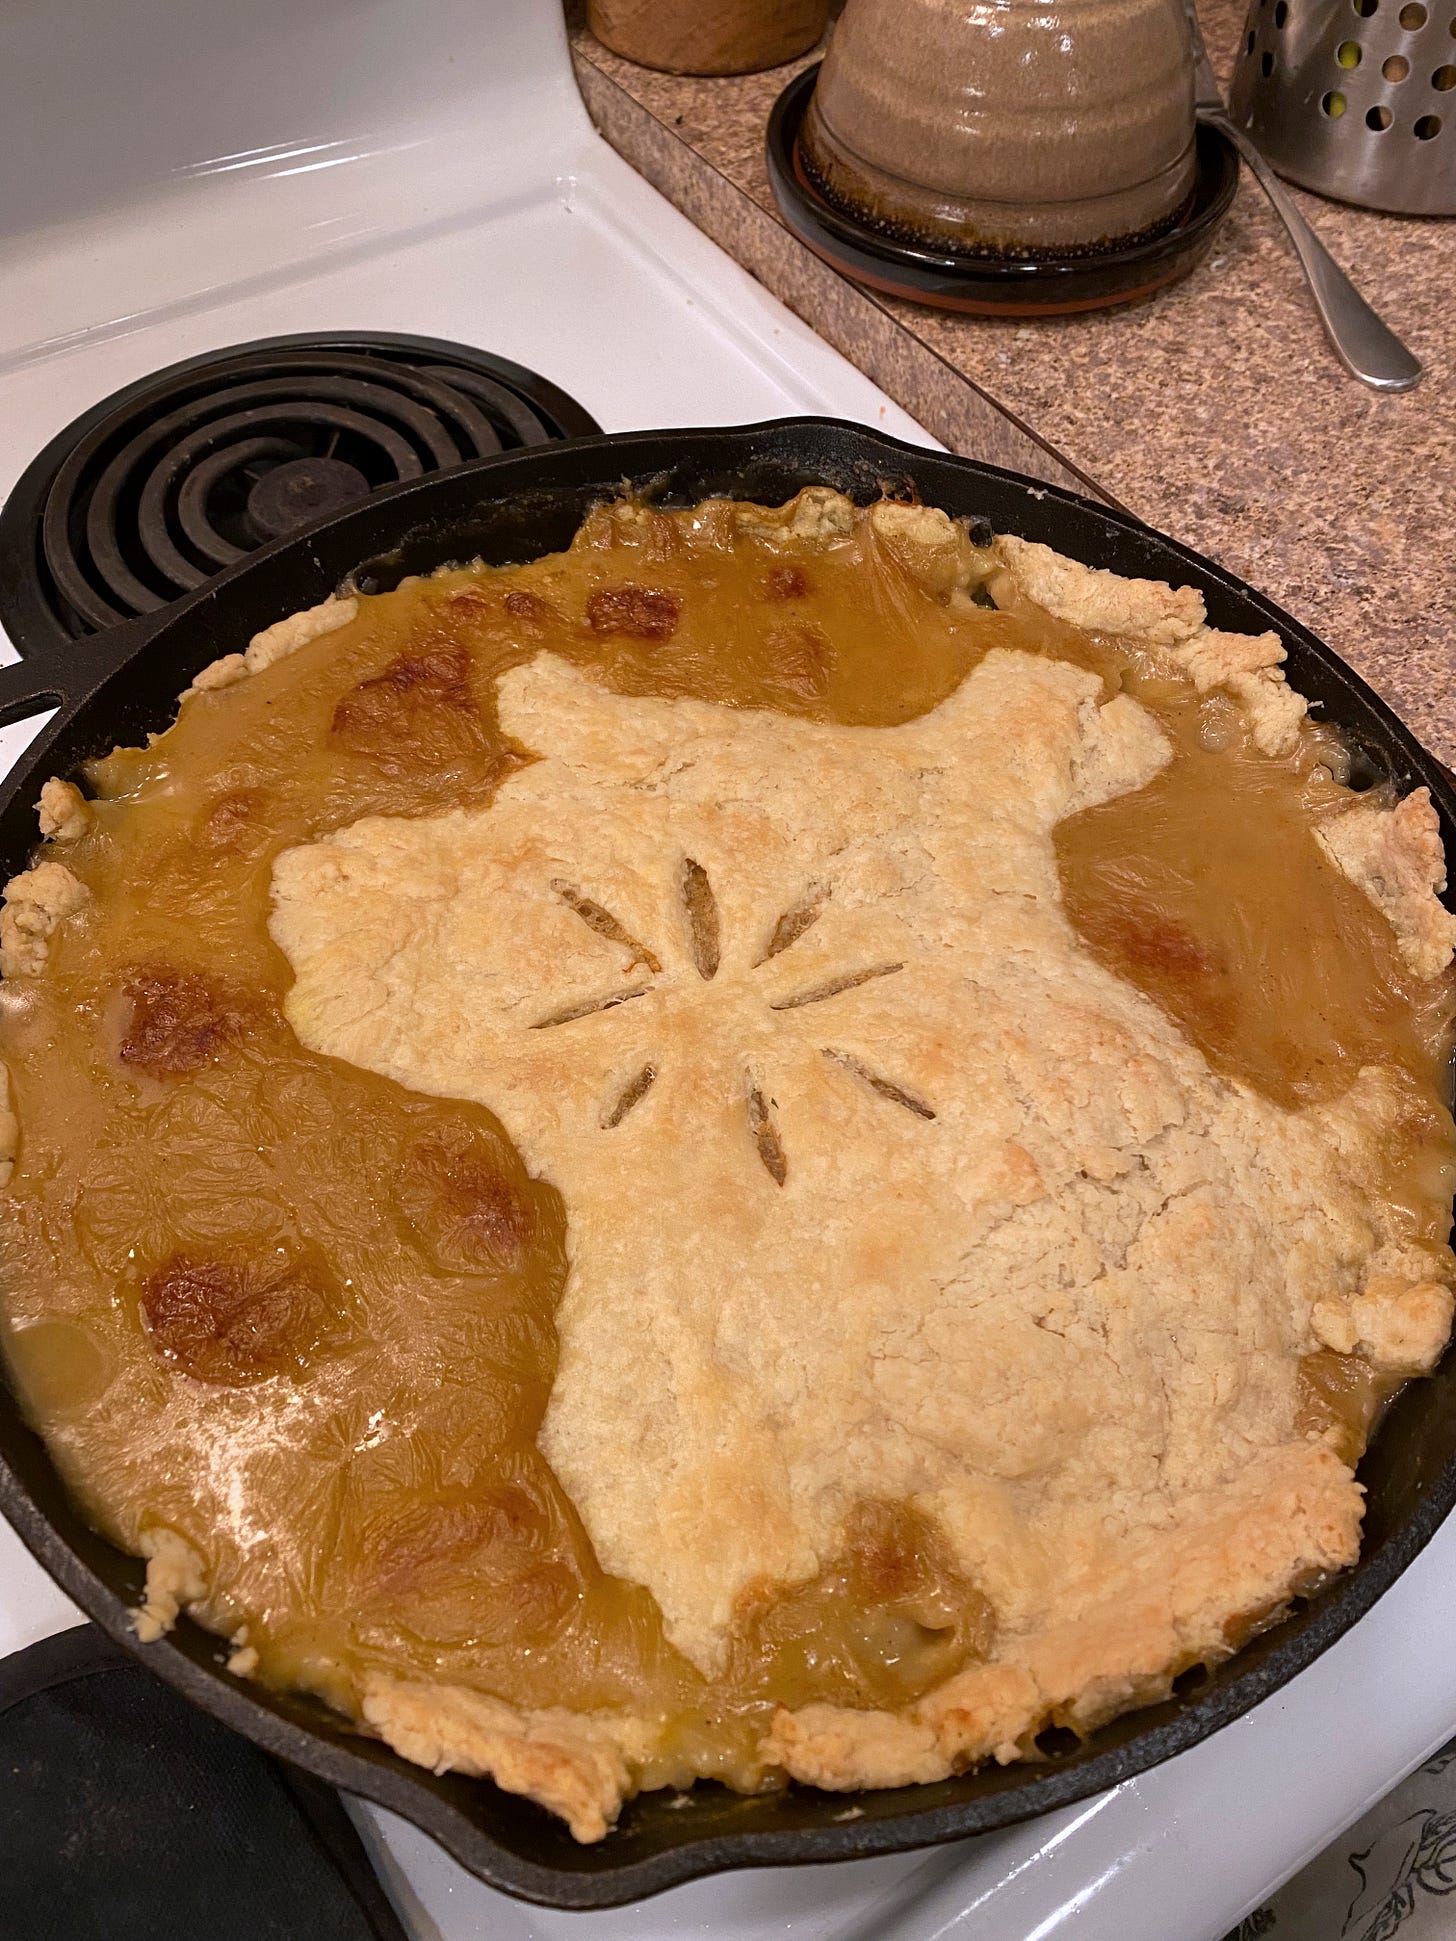 A cast iron pan with a pot pie, an asterisk shape scored in the centre. A brownish curried gravy has spilled overtop of the crust in several places.